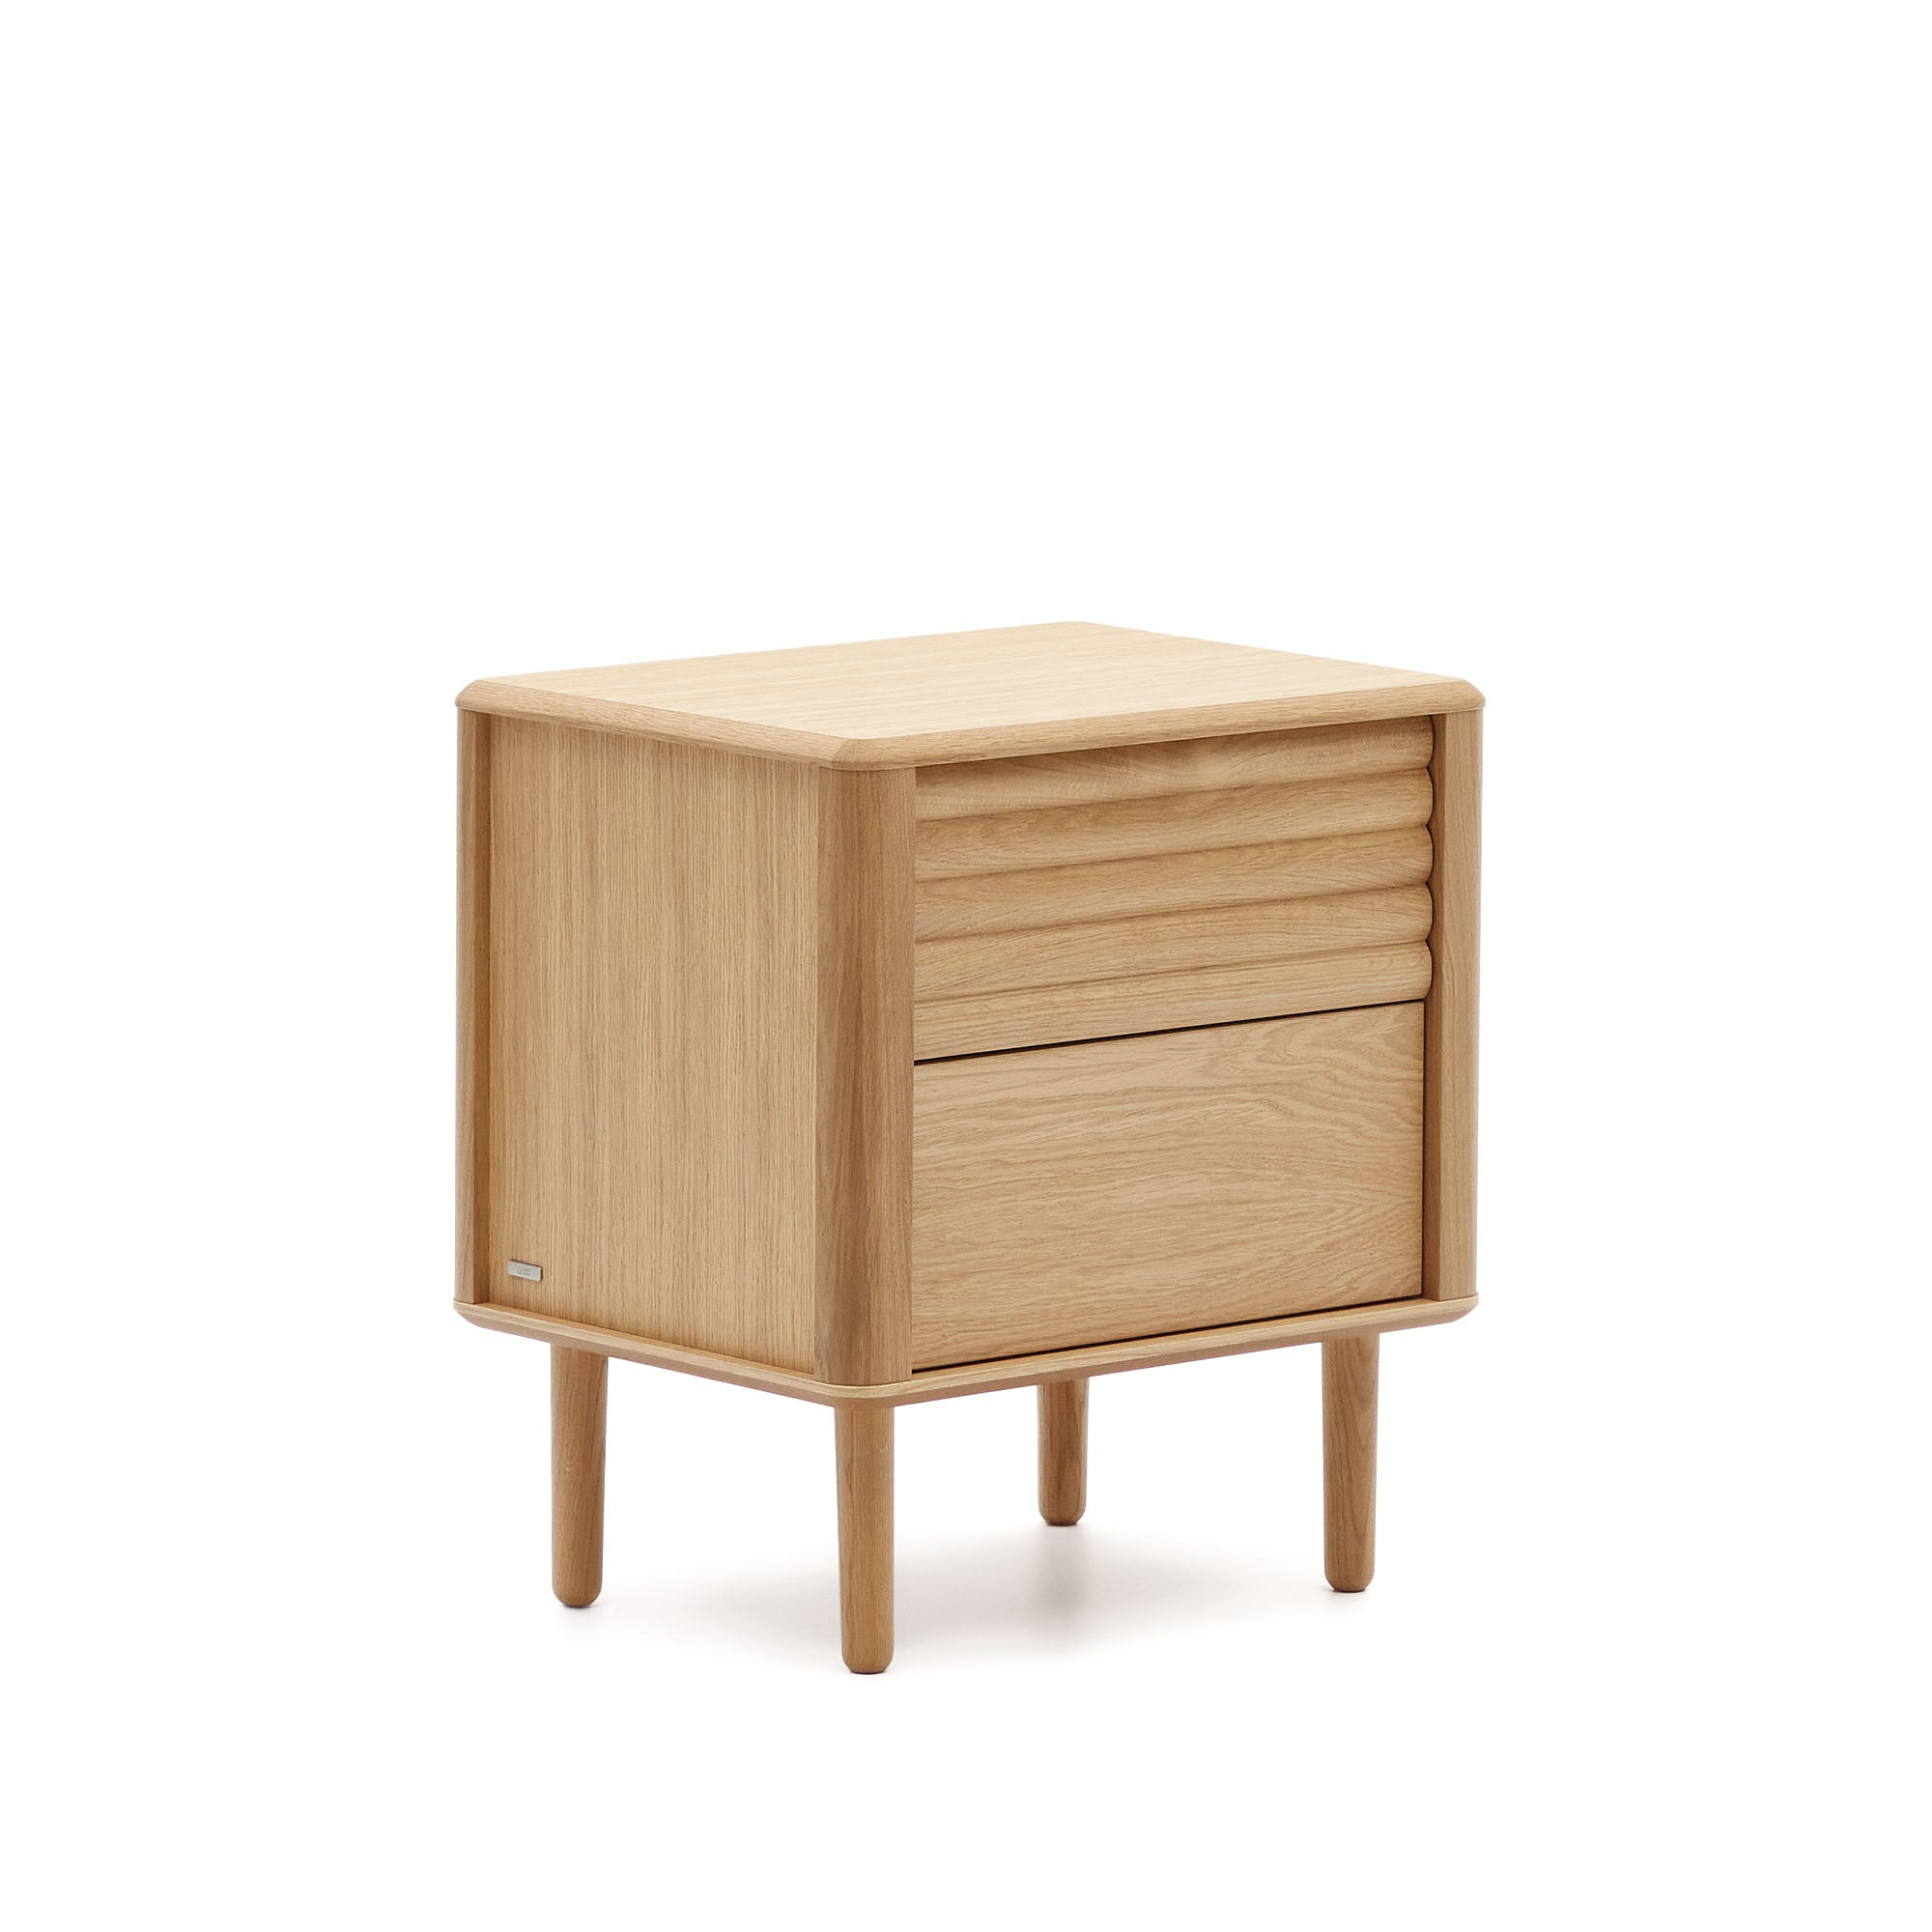 Lenon oak wood and veneer bedside table with 2 drawers, 50 x 55 cm FSC MIX Credit